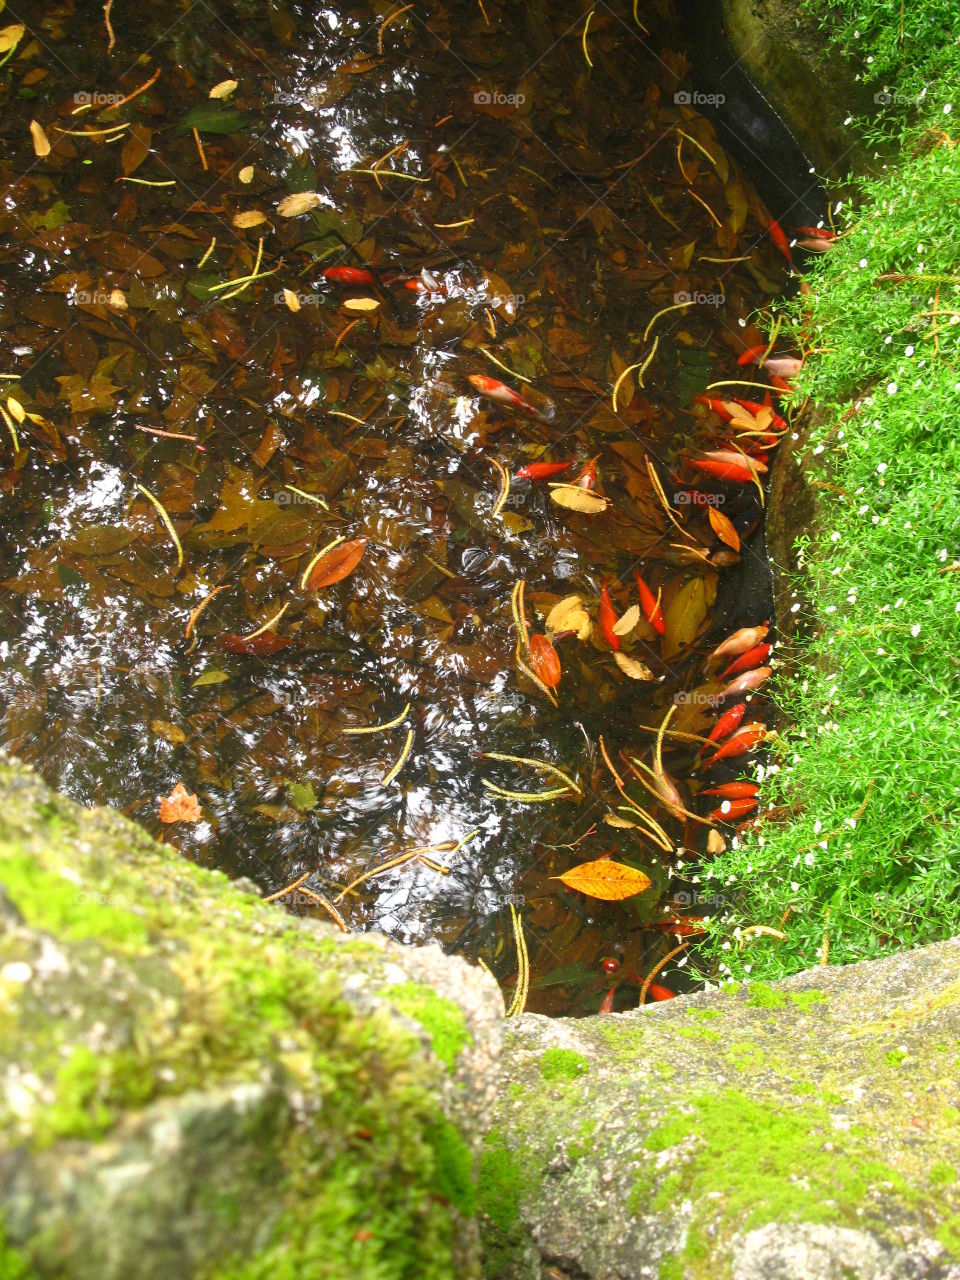 Fish in the lake of Sintra's park in Portugal